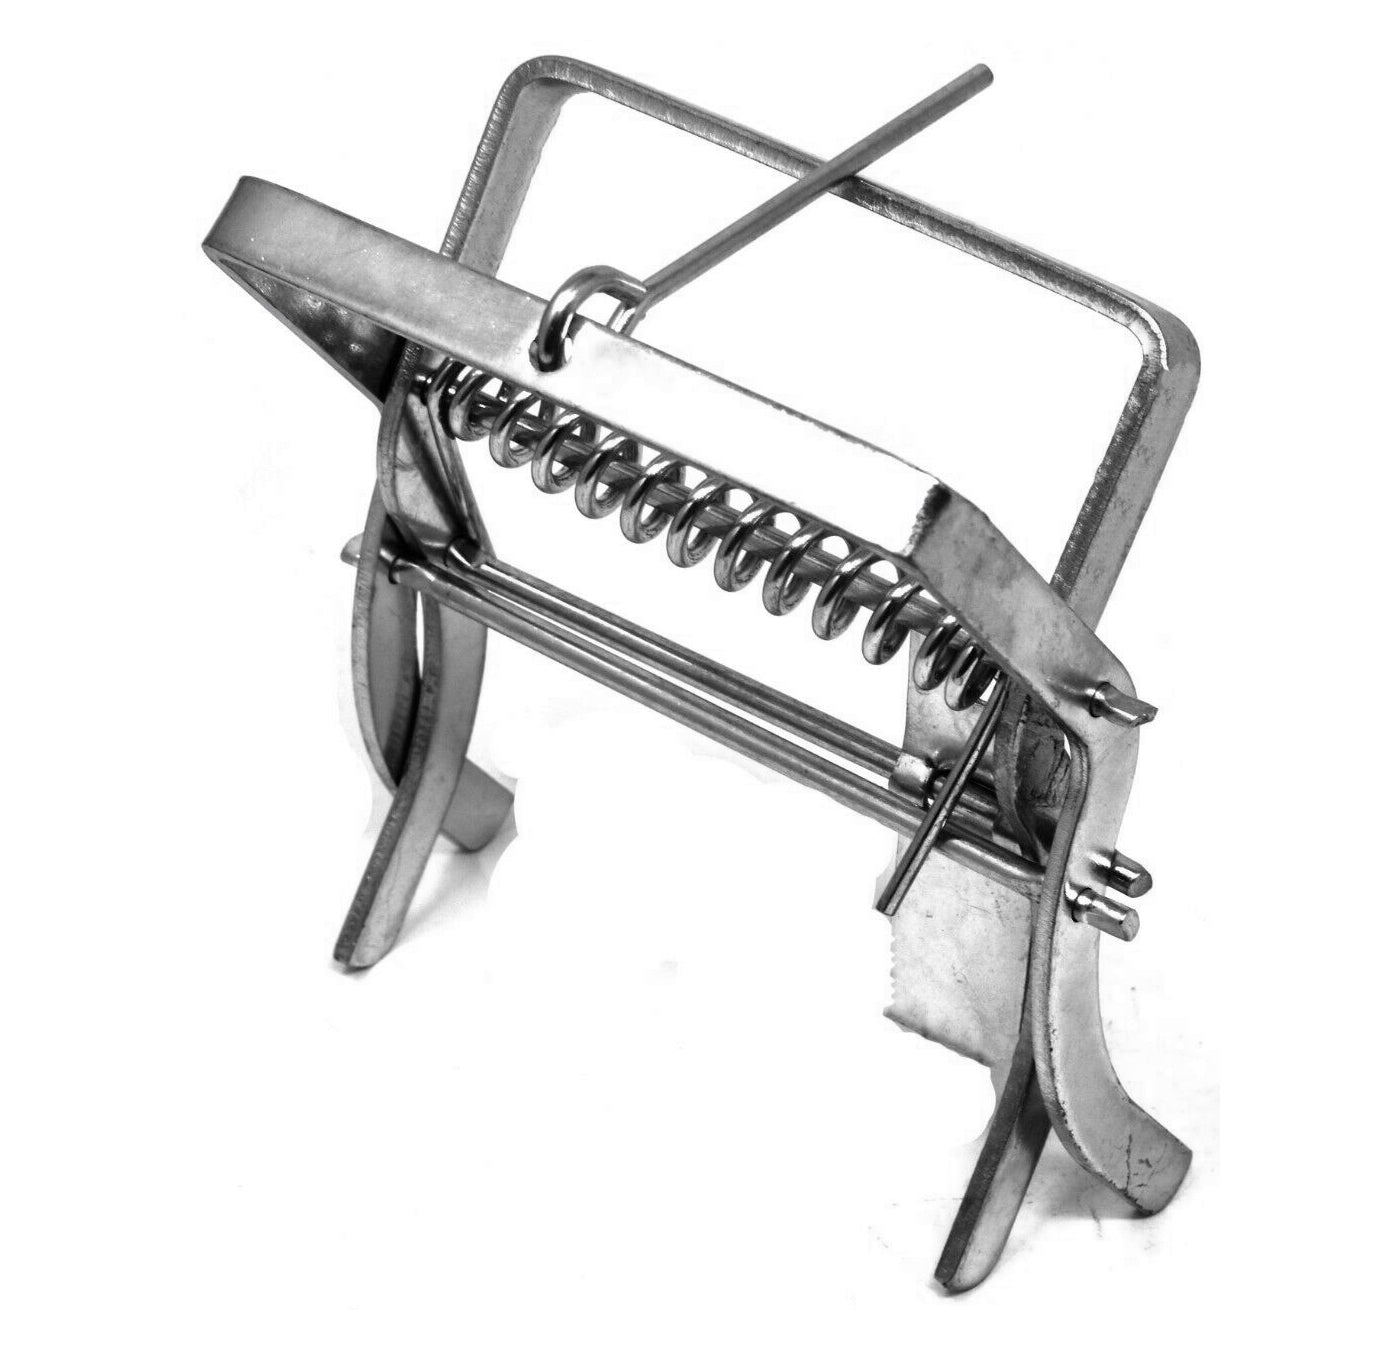 Racan - Claw Mole Trap - Buy Online SPR Centre UK